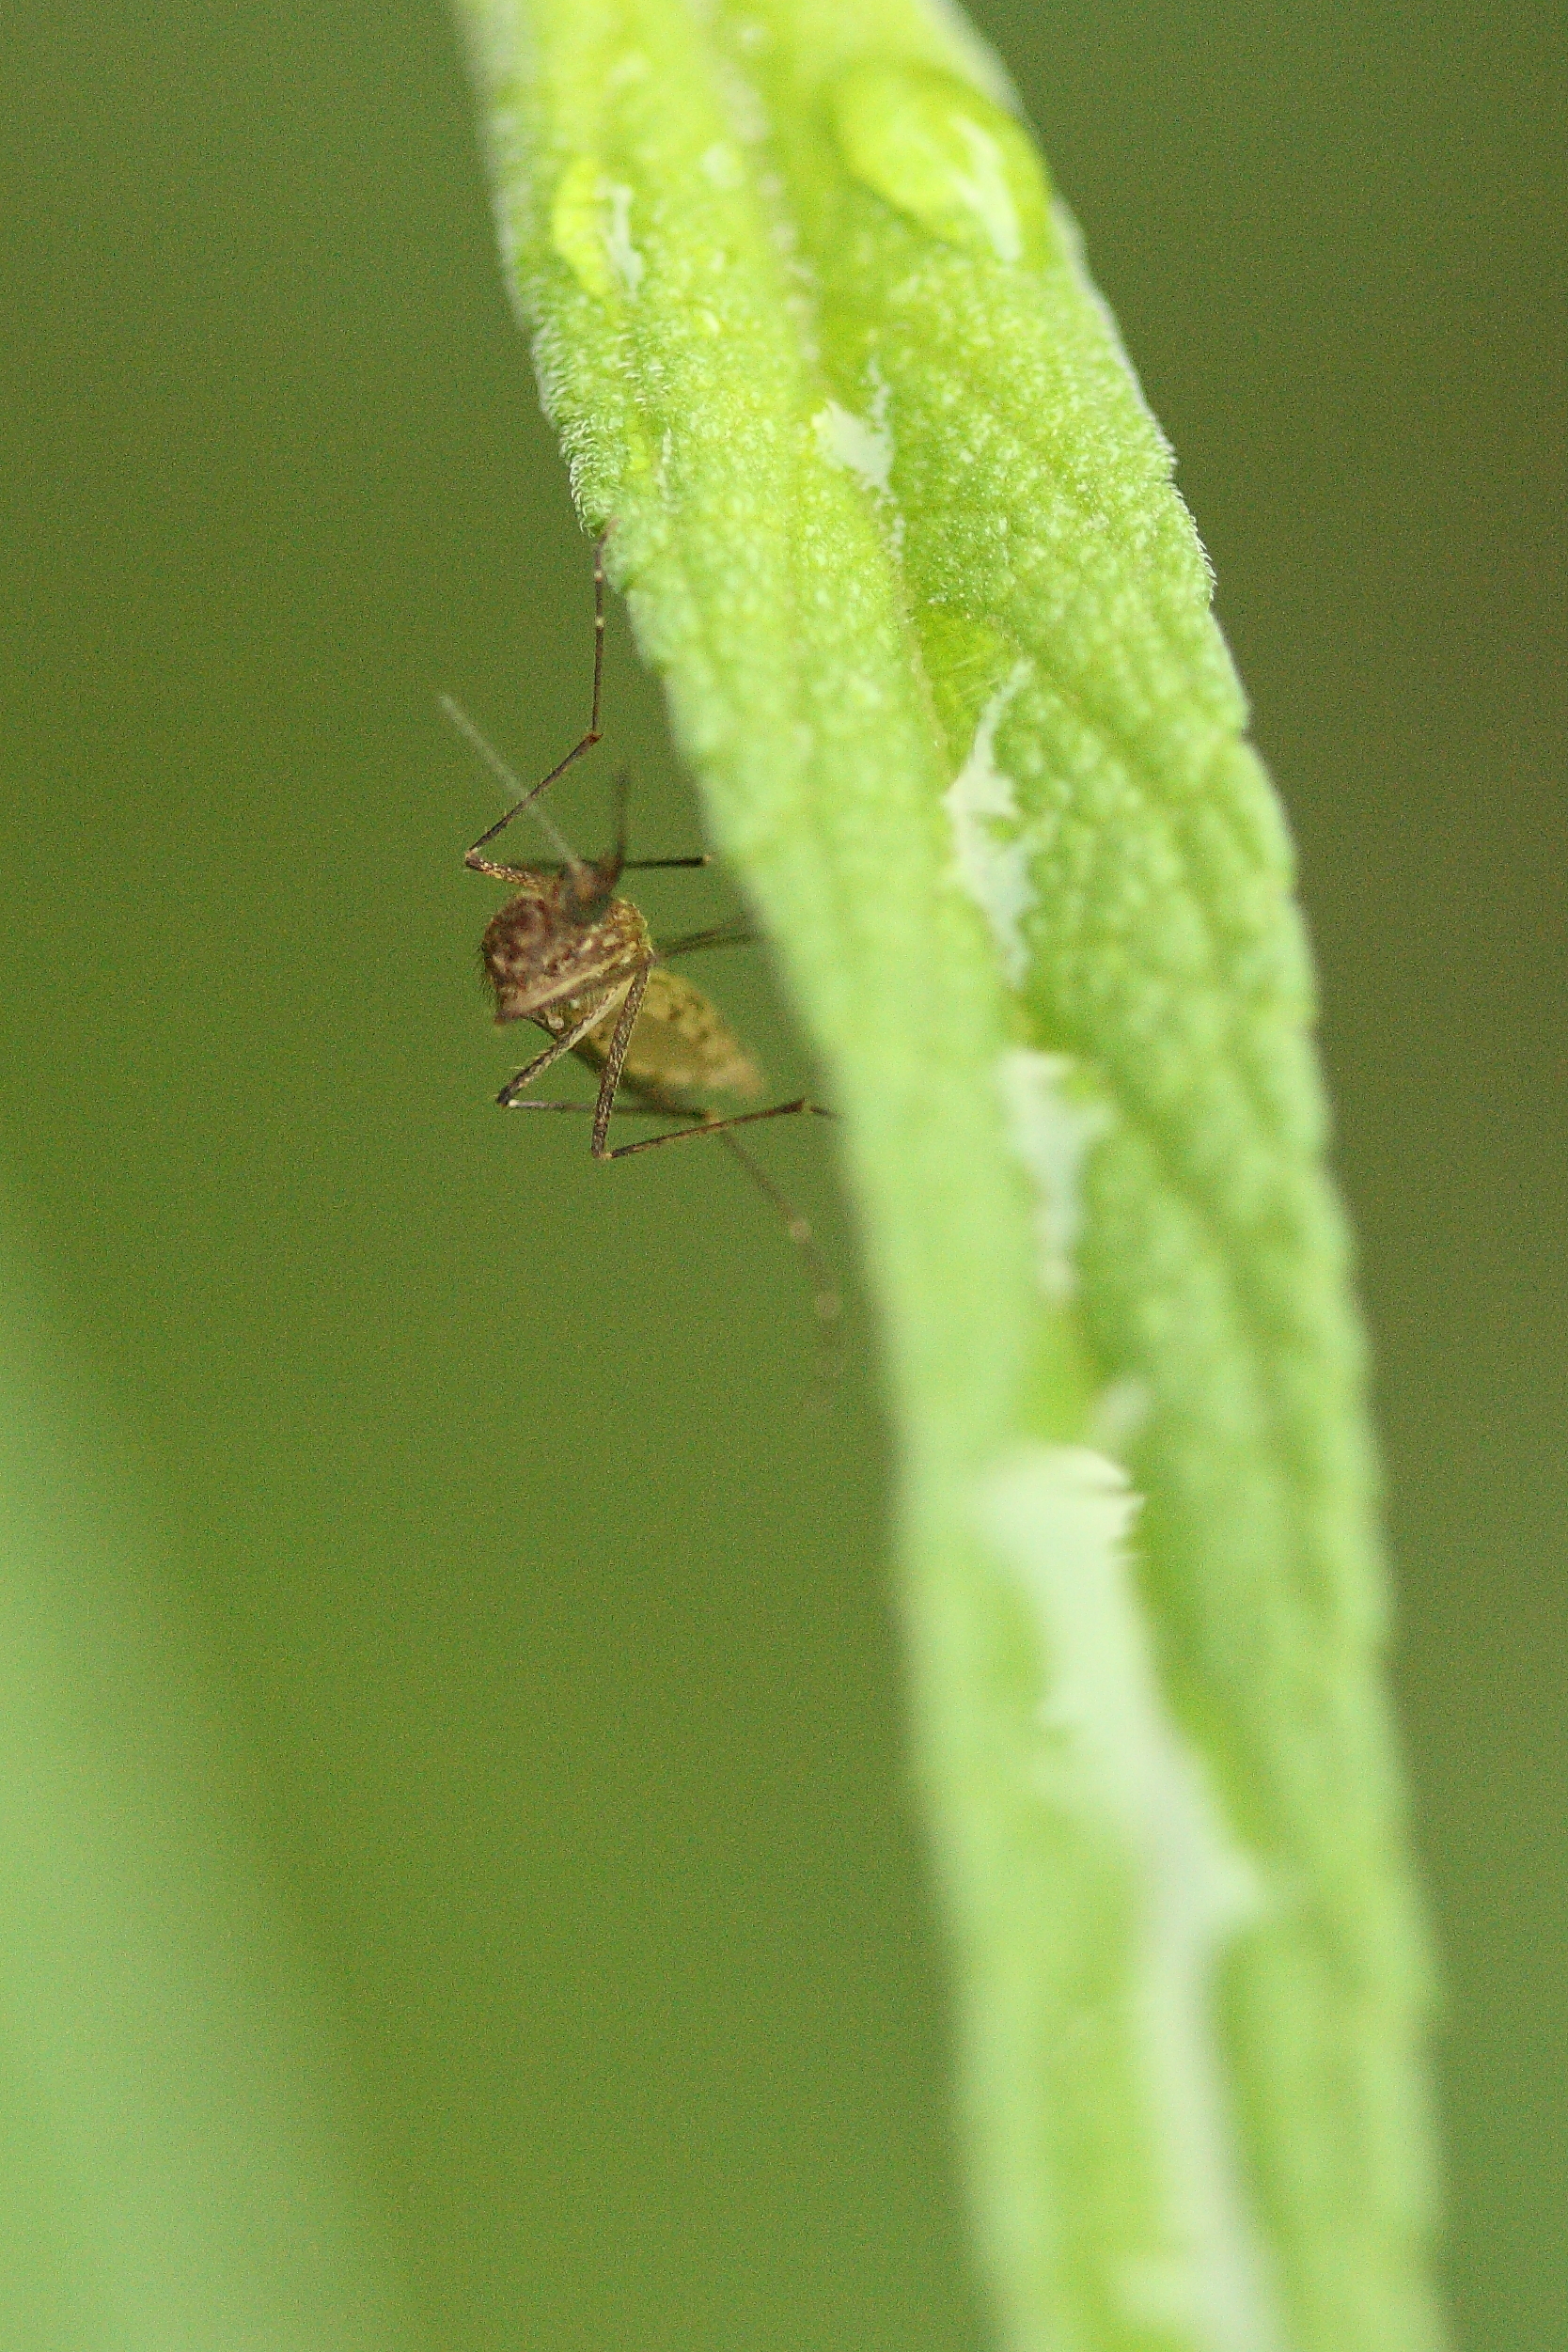 Mosquito on leaf